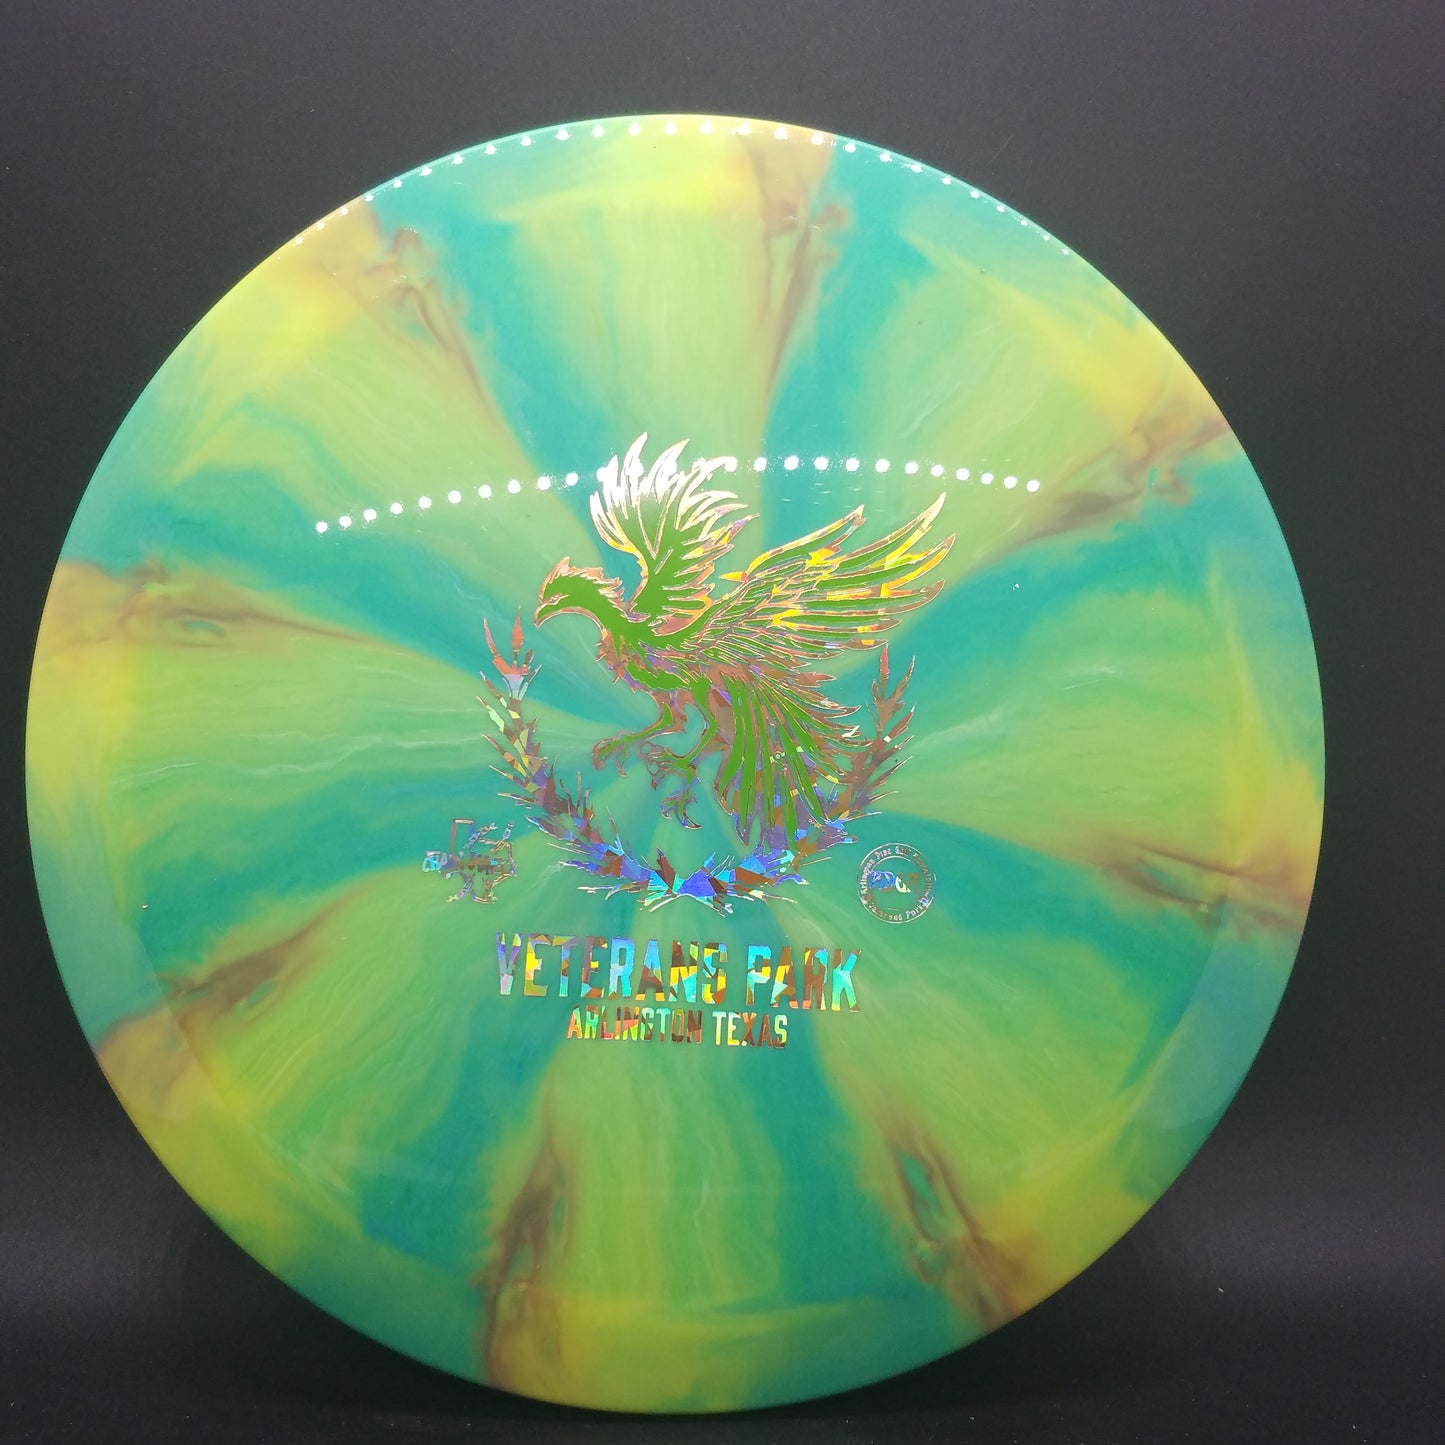 Mint VPO Apex Phoenix yellow/green with green/silver shatter stamp 175g